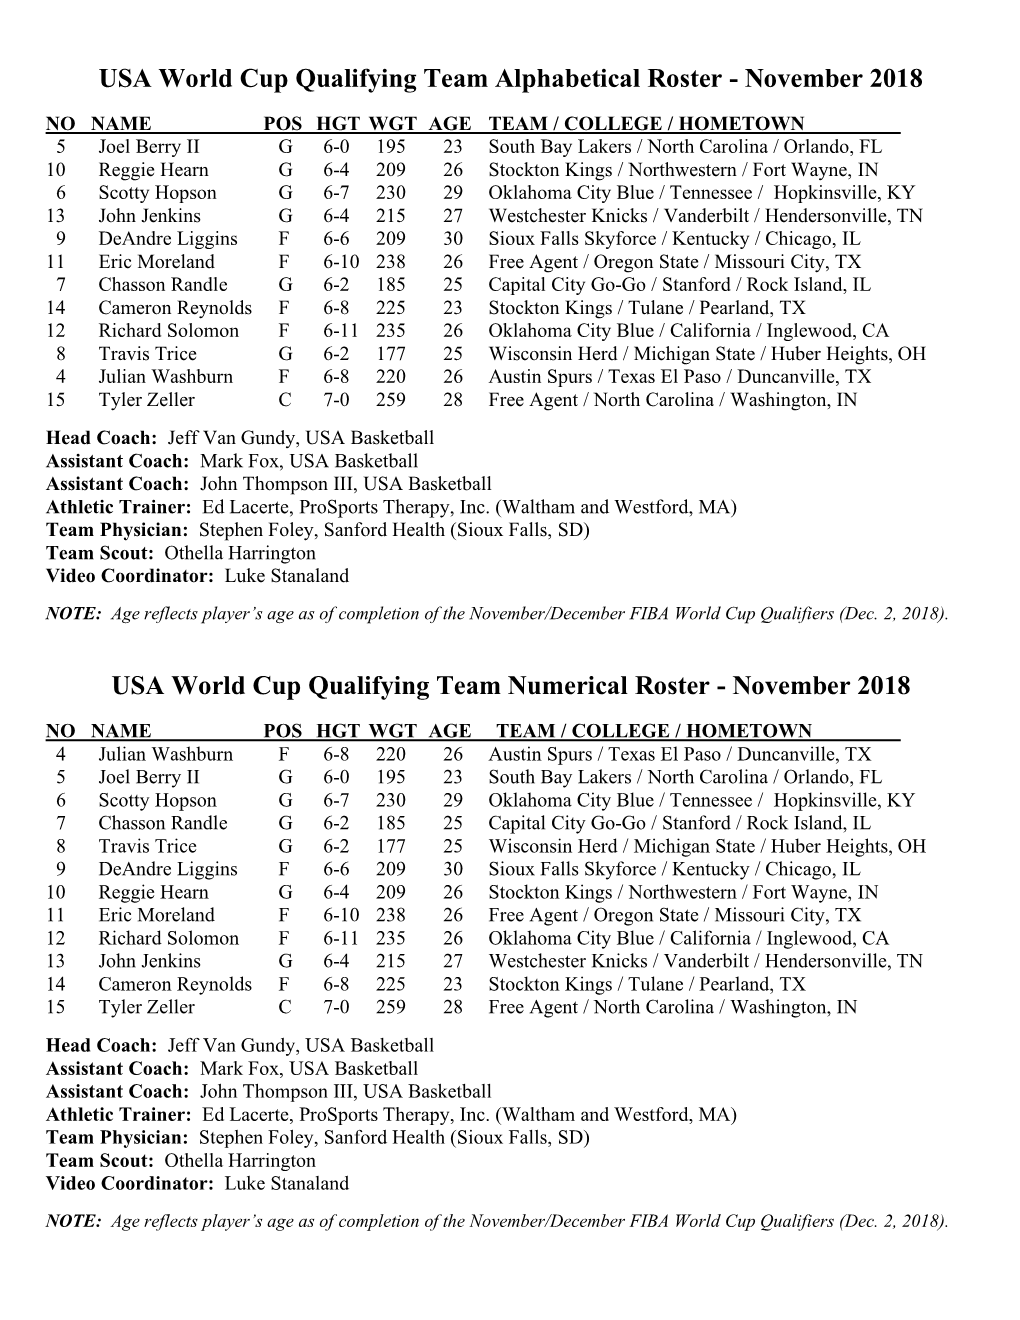 USA World Cup Qualifying Team Alphabetical Roster - November 2018